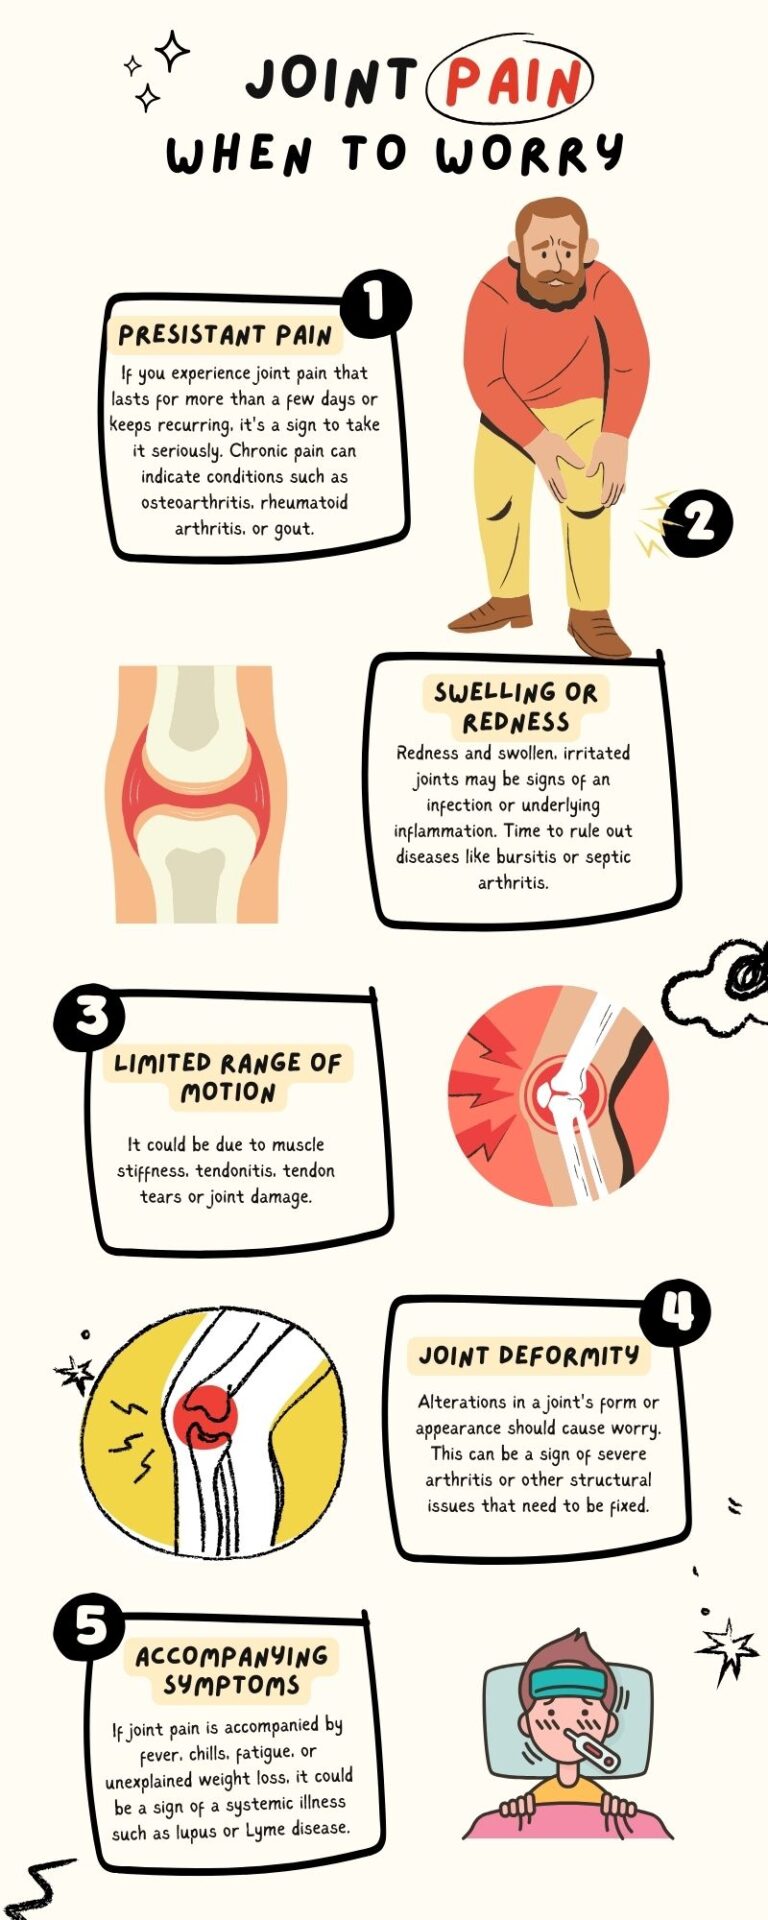 when should i worry about joint pain - symptoms to watch out for